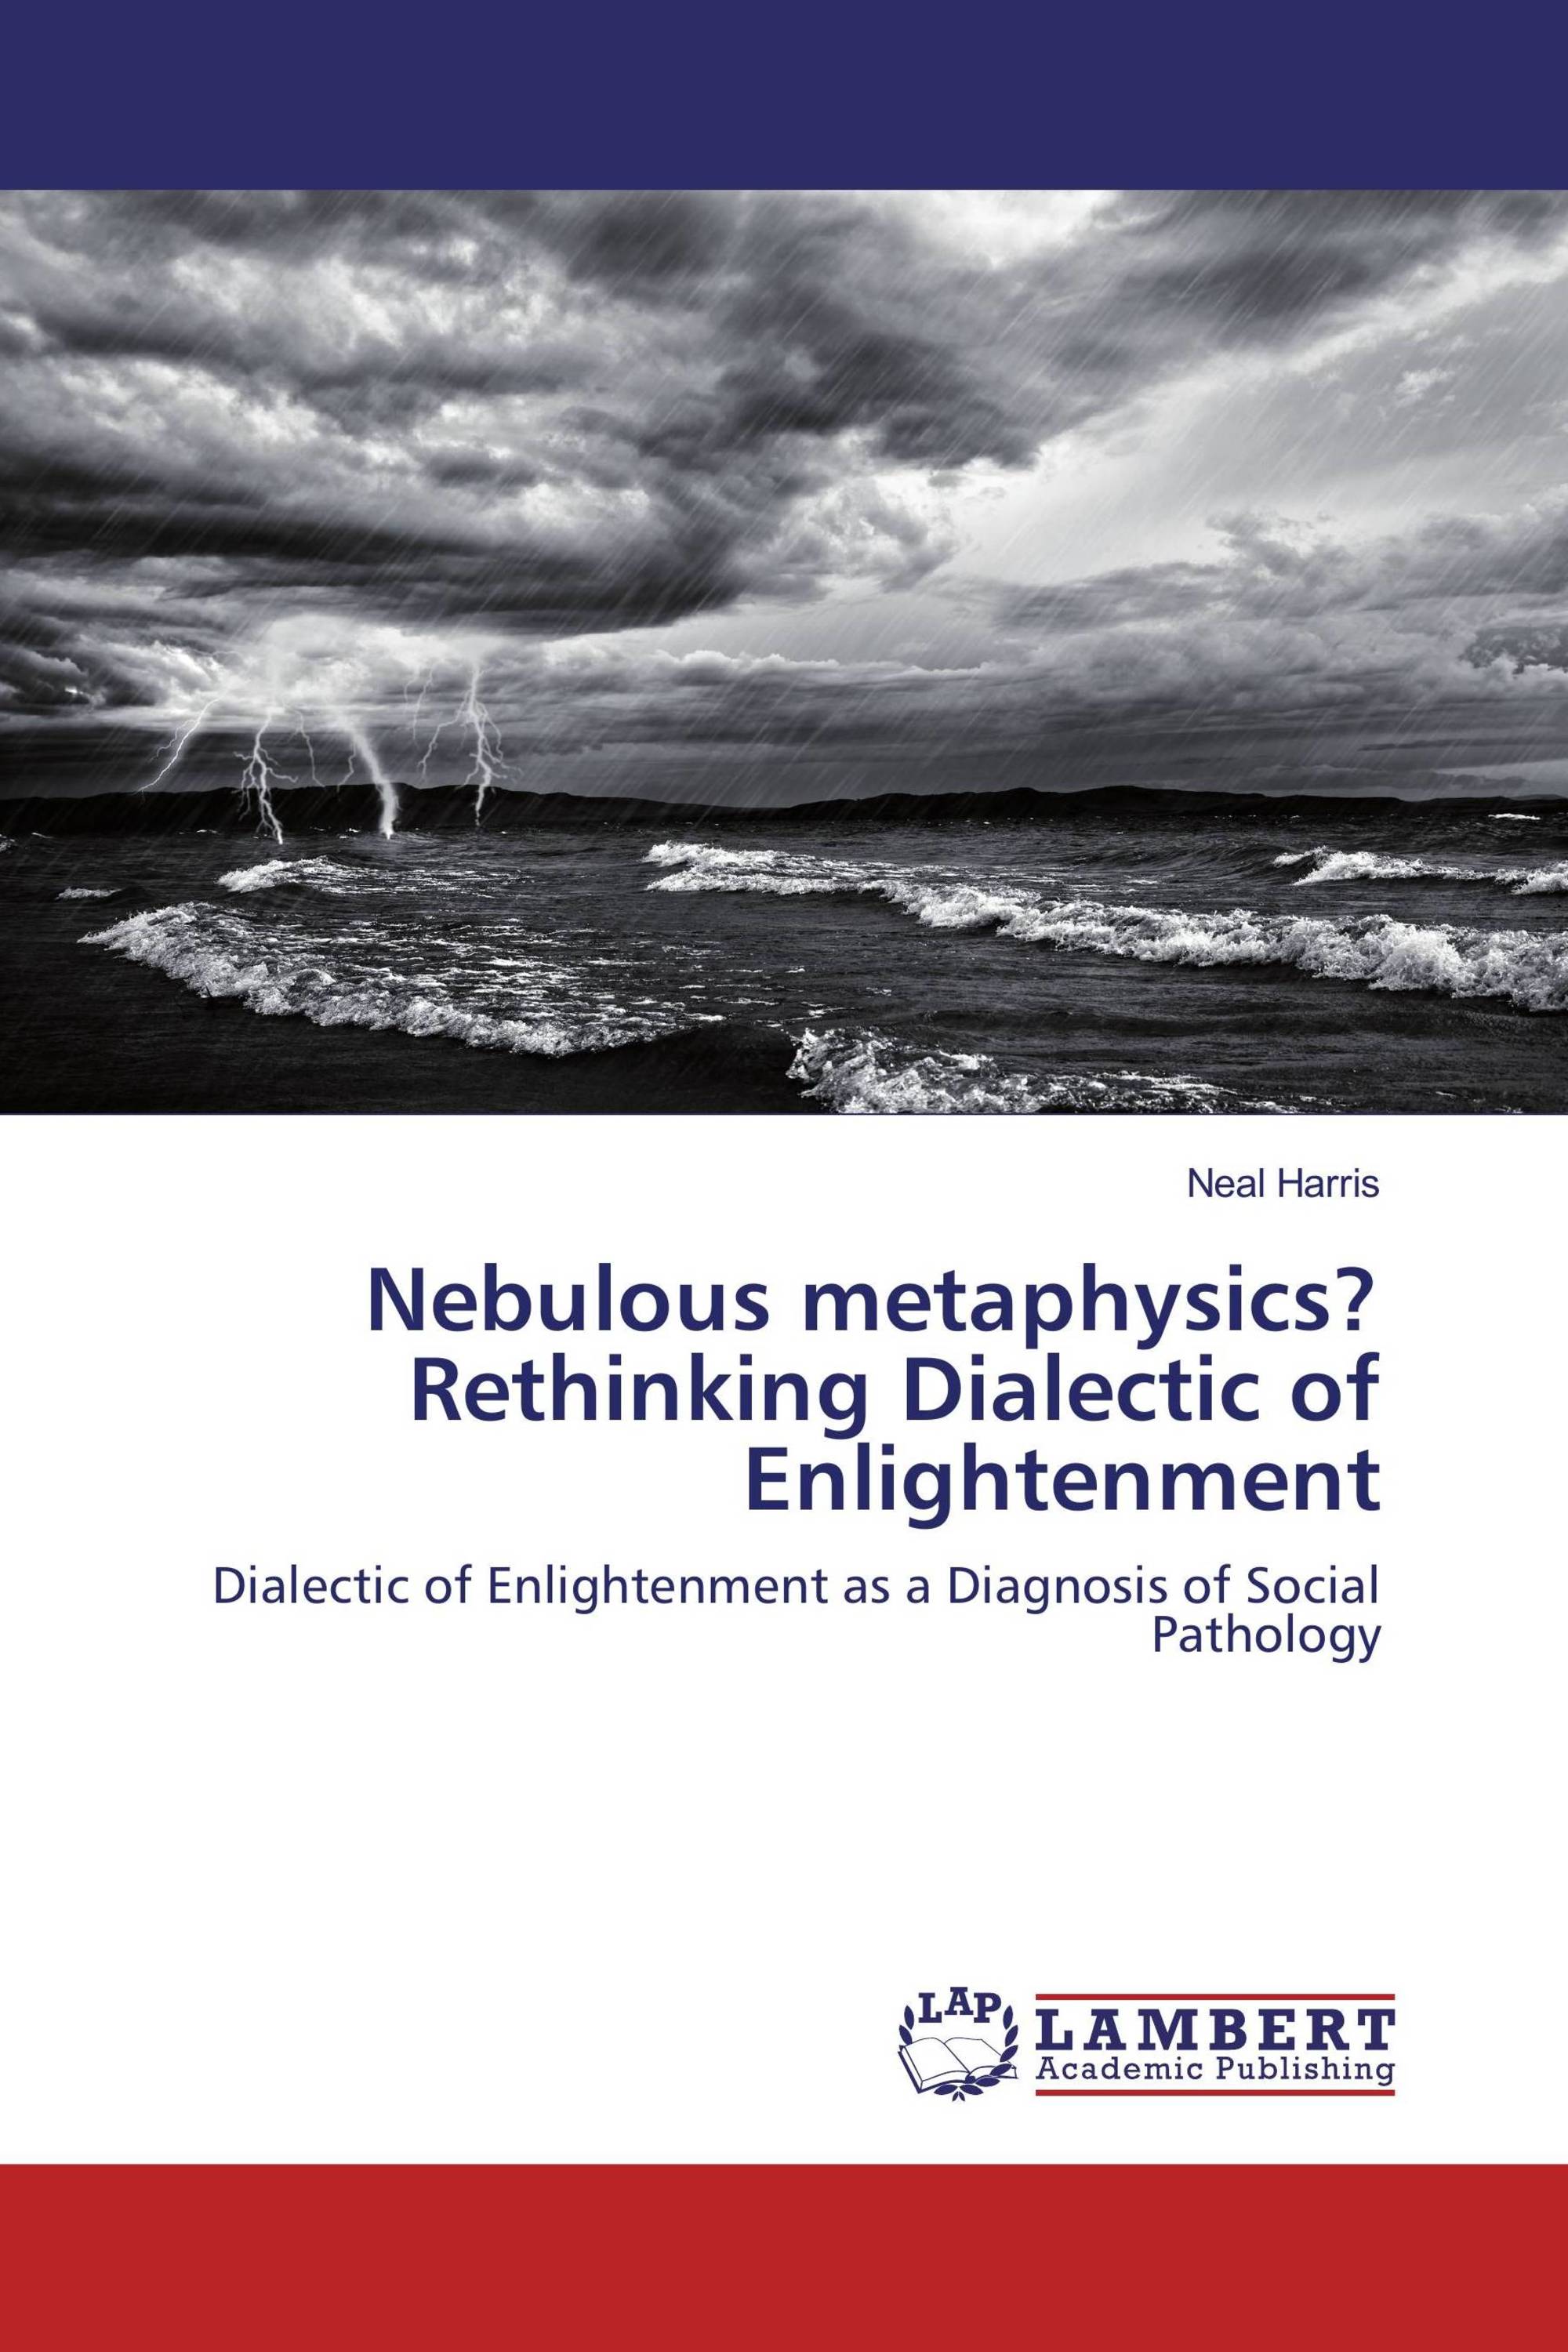 dialectic of enlightenment pdf